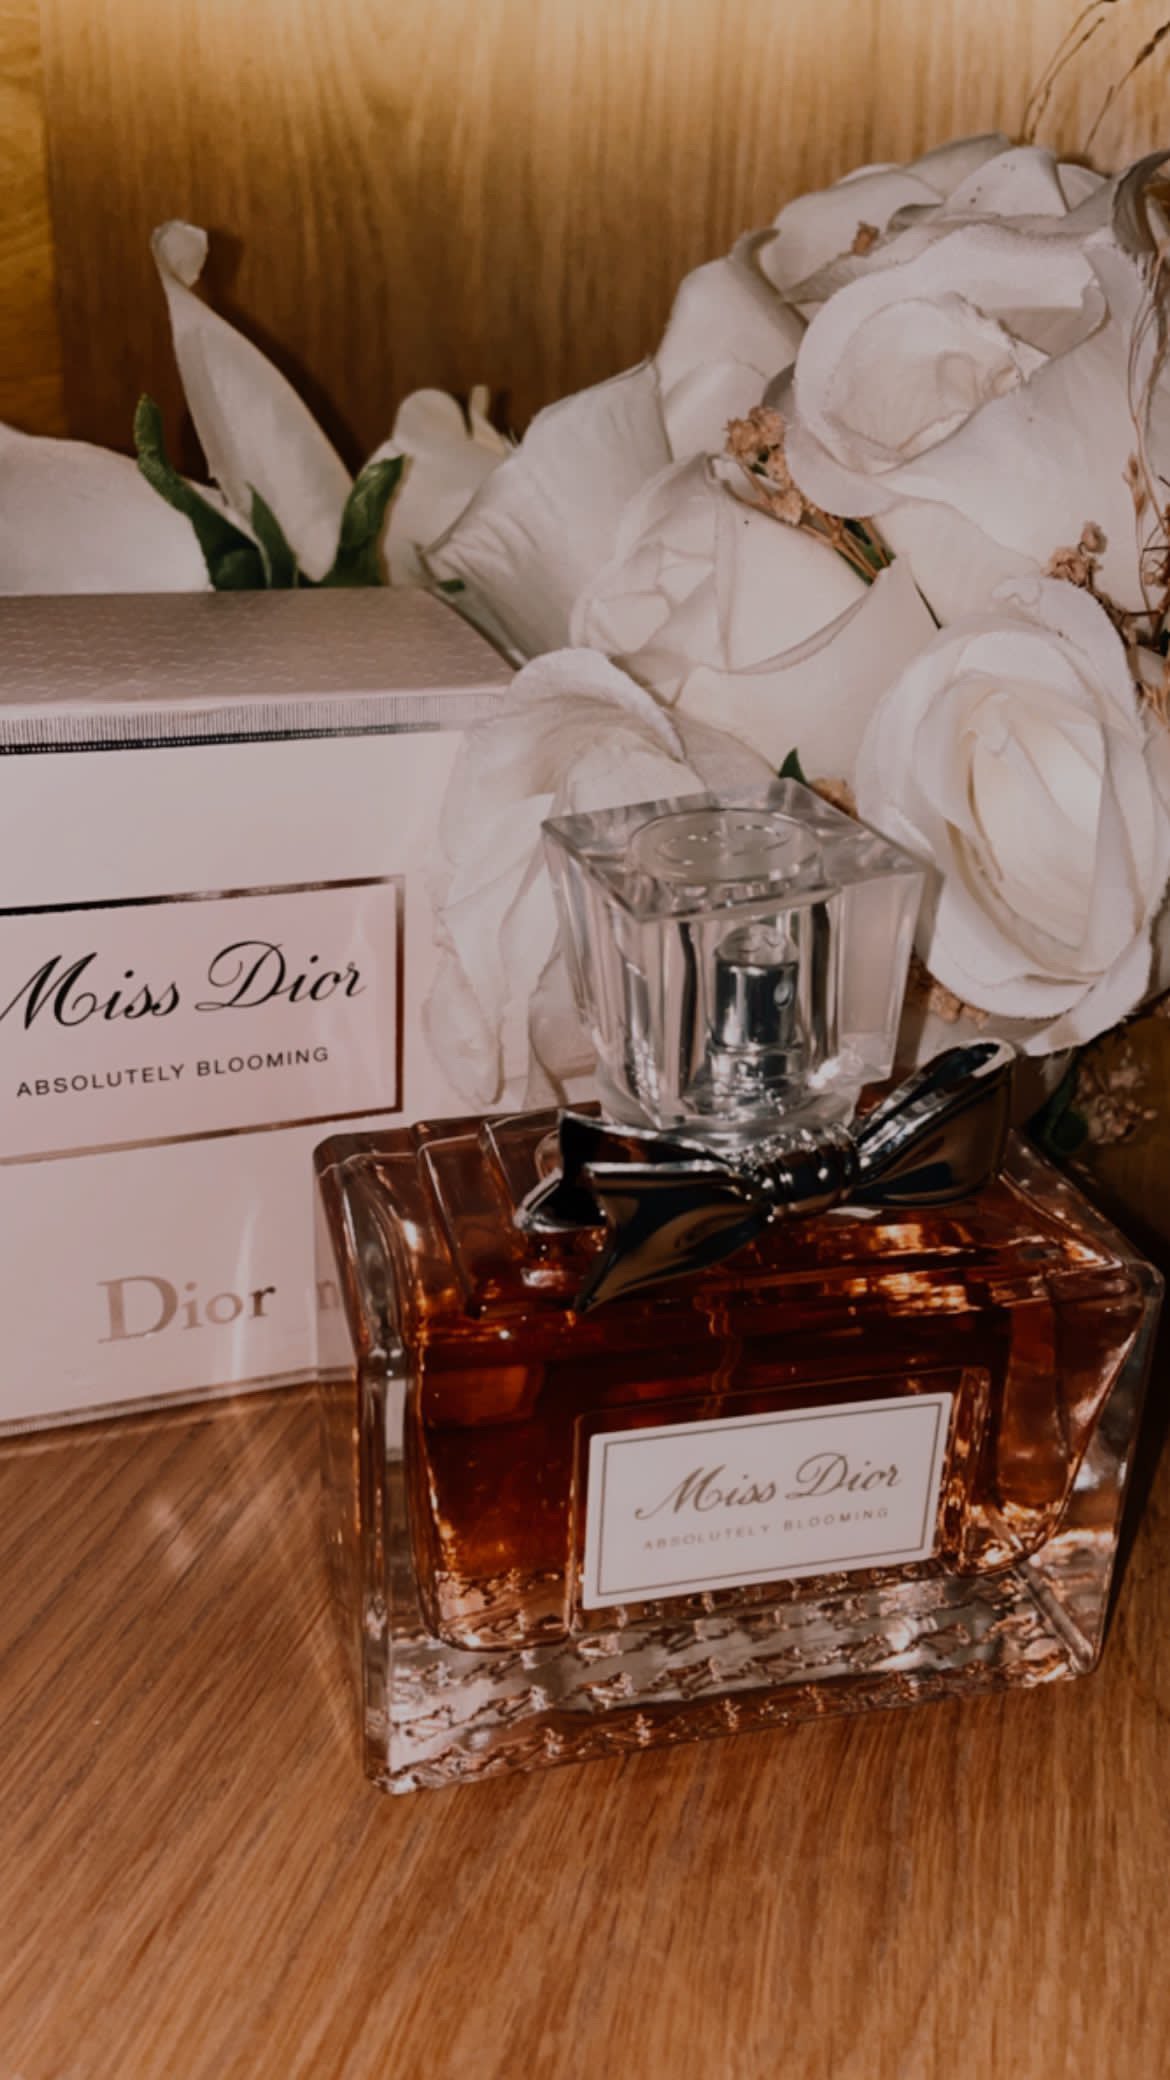 Miss Dior Absolutly Blooming